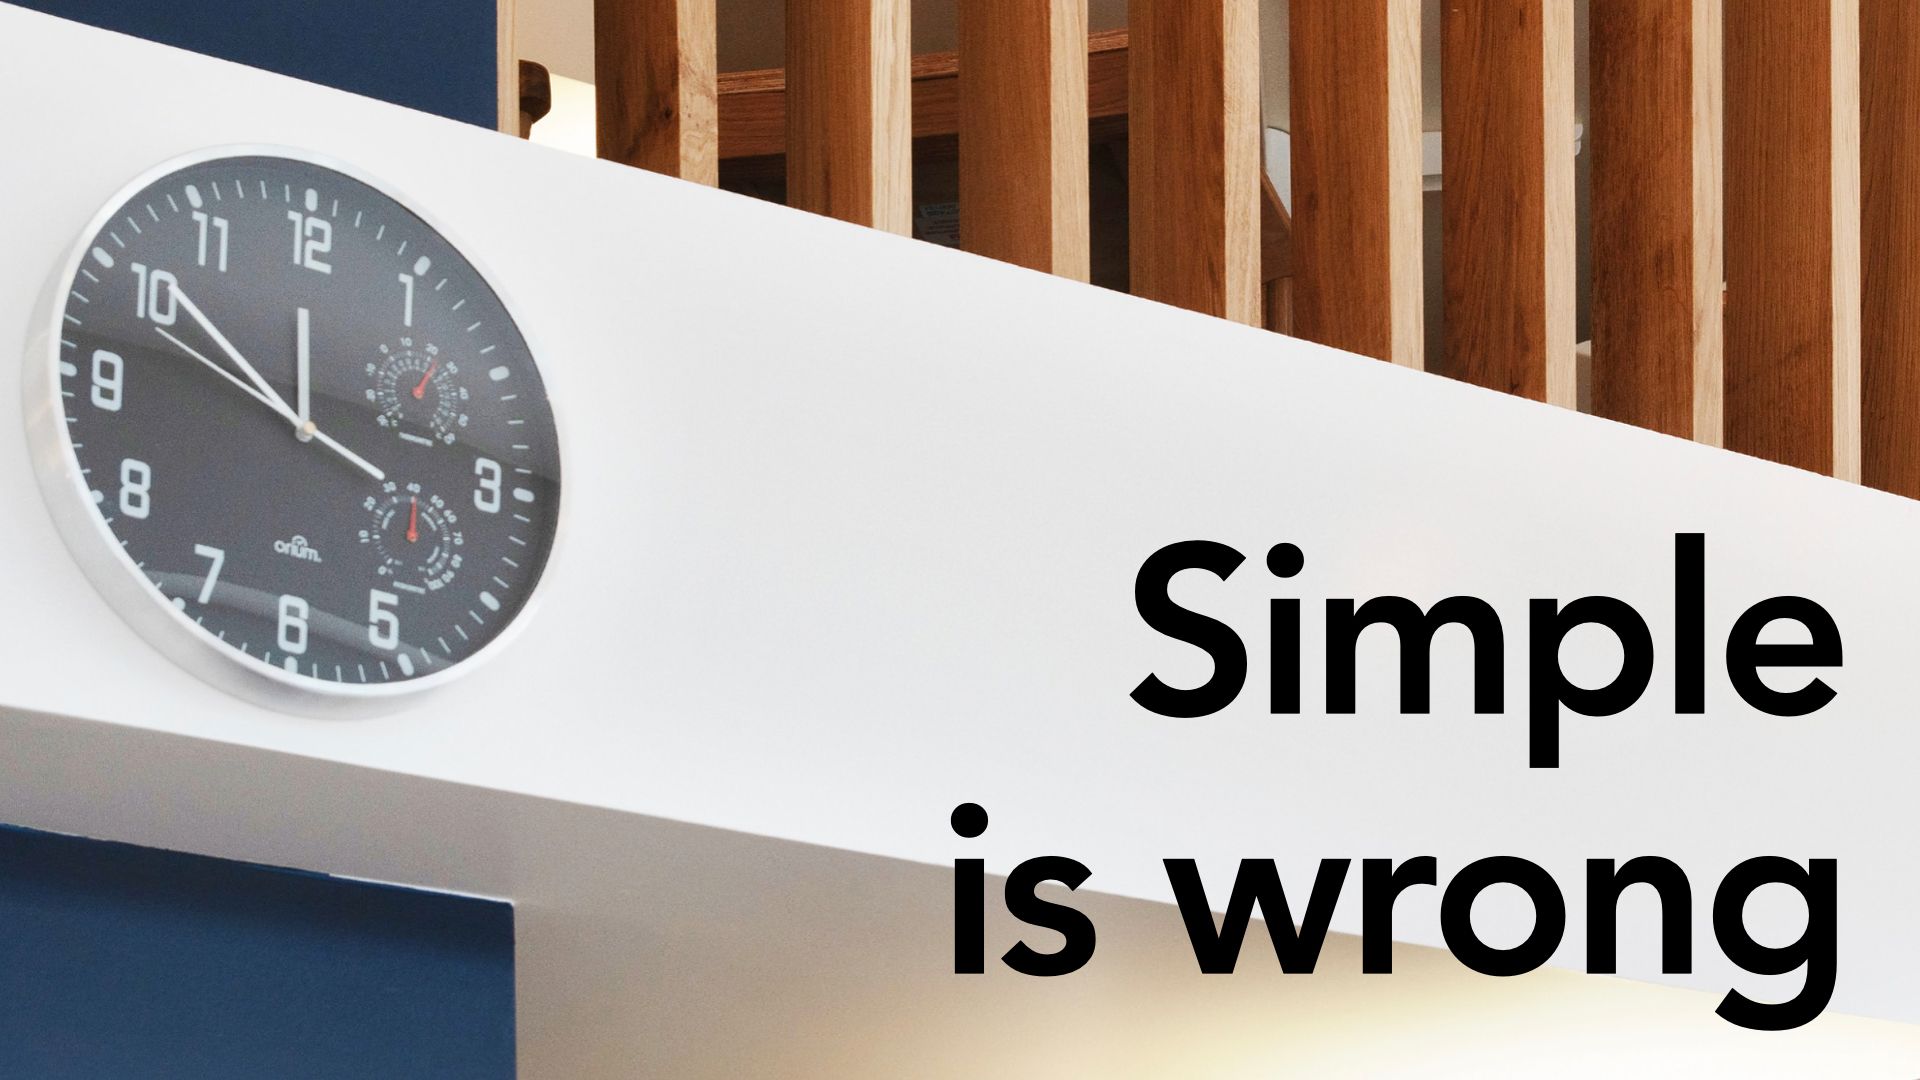 Slide text "Simple is wrong" overlaid on image of modernist wooden decor and clock